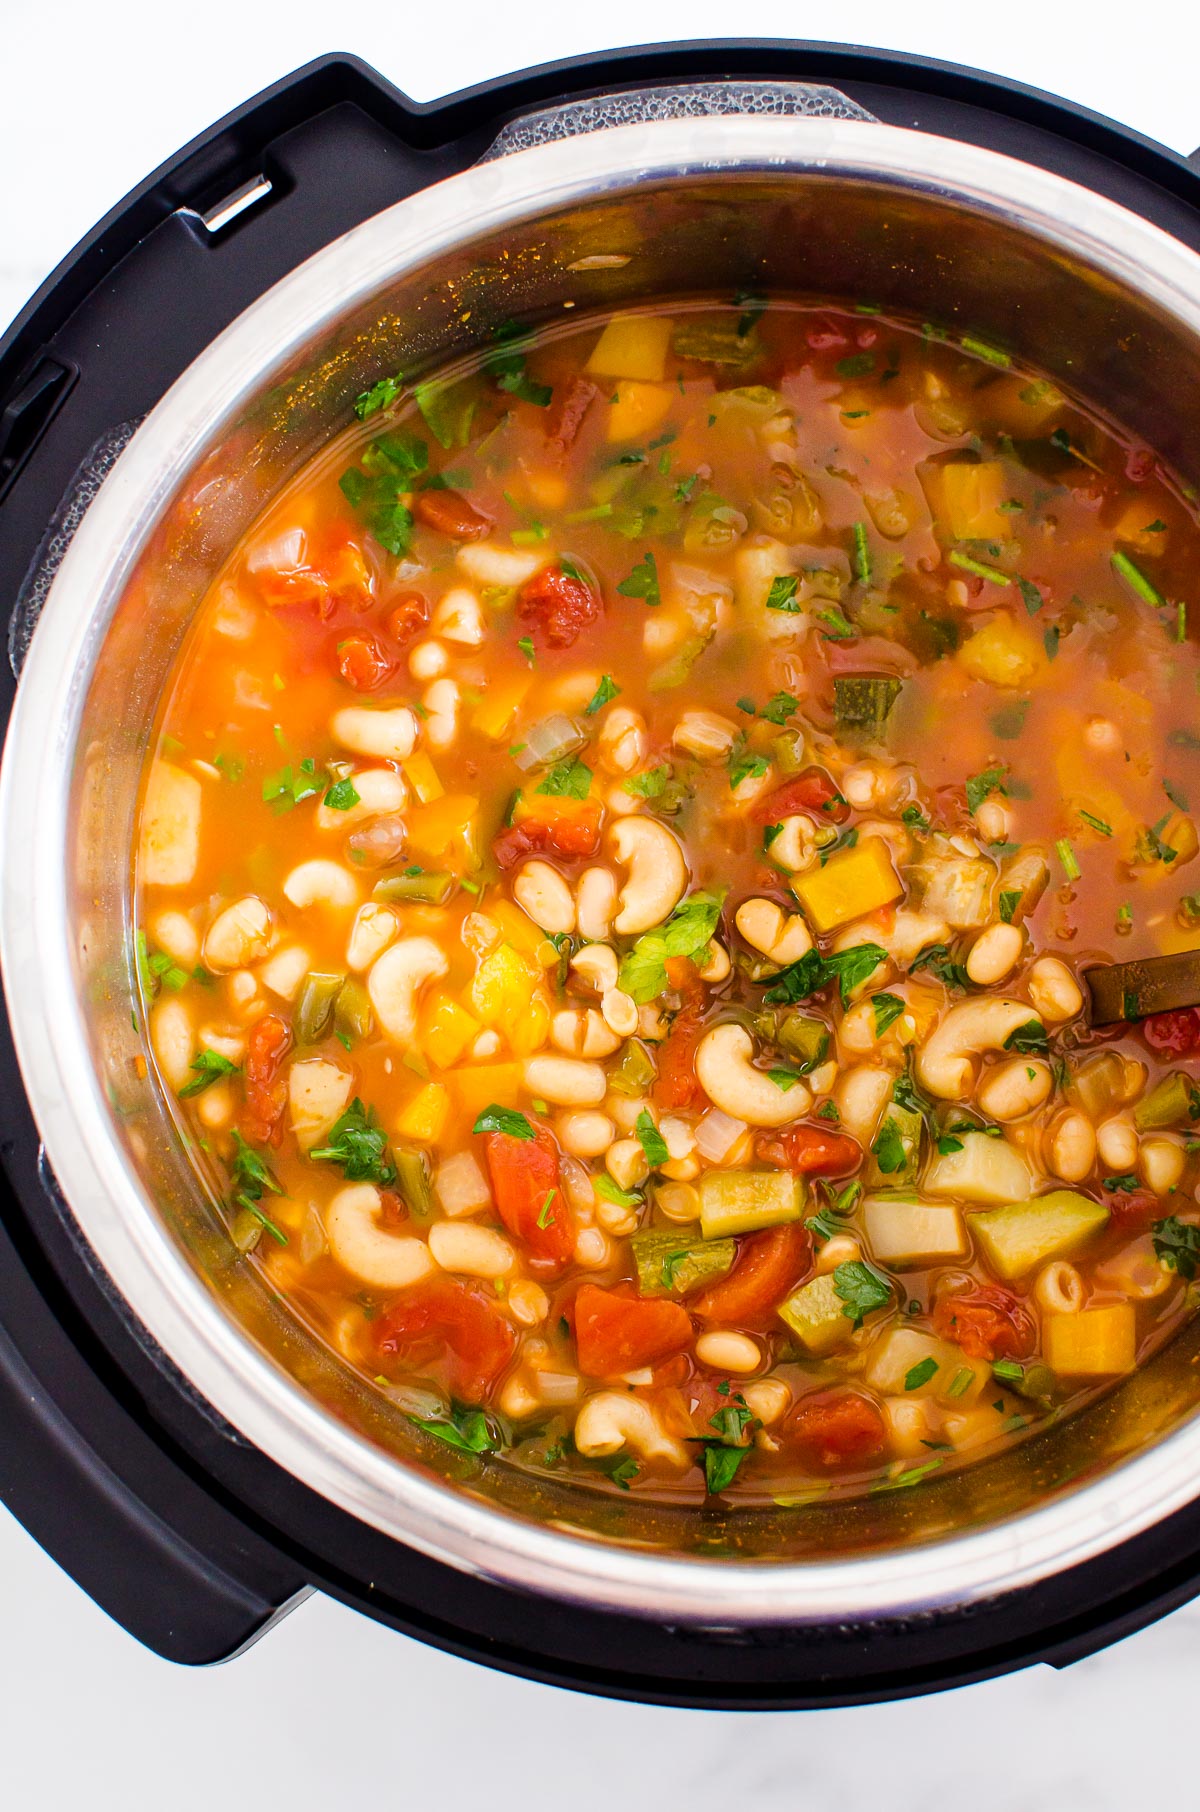 Instant Pot minestrone soup garnished with parsley.